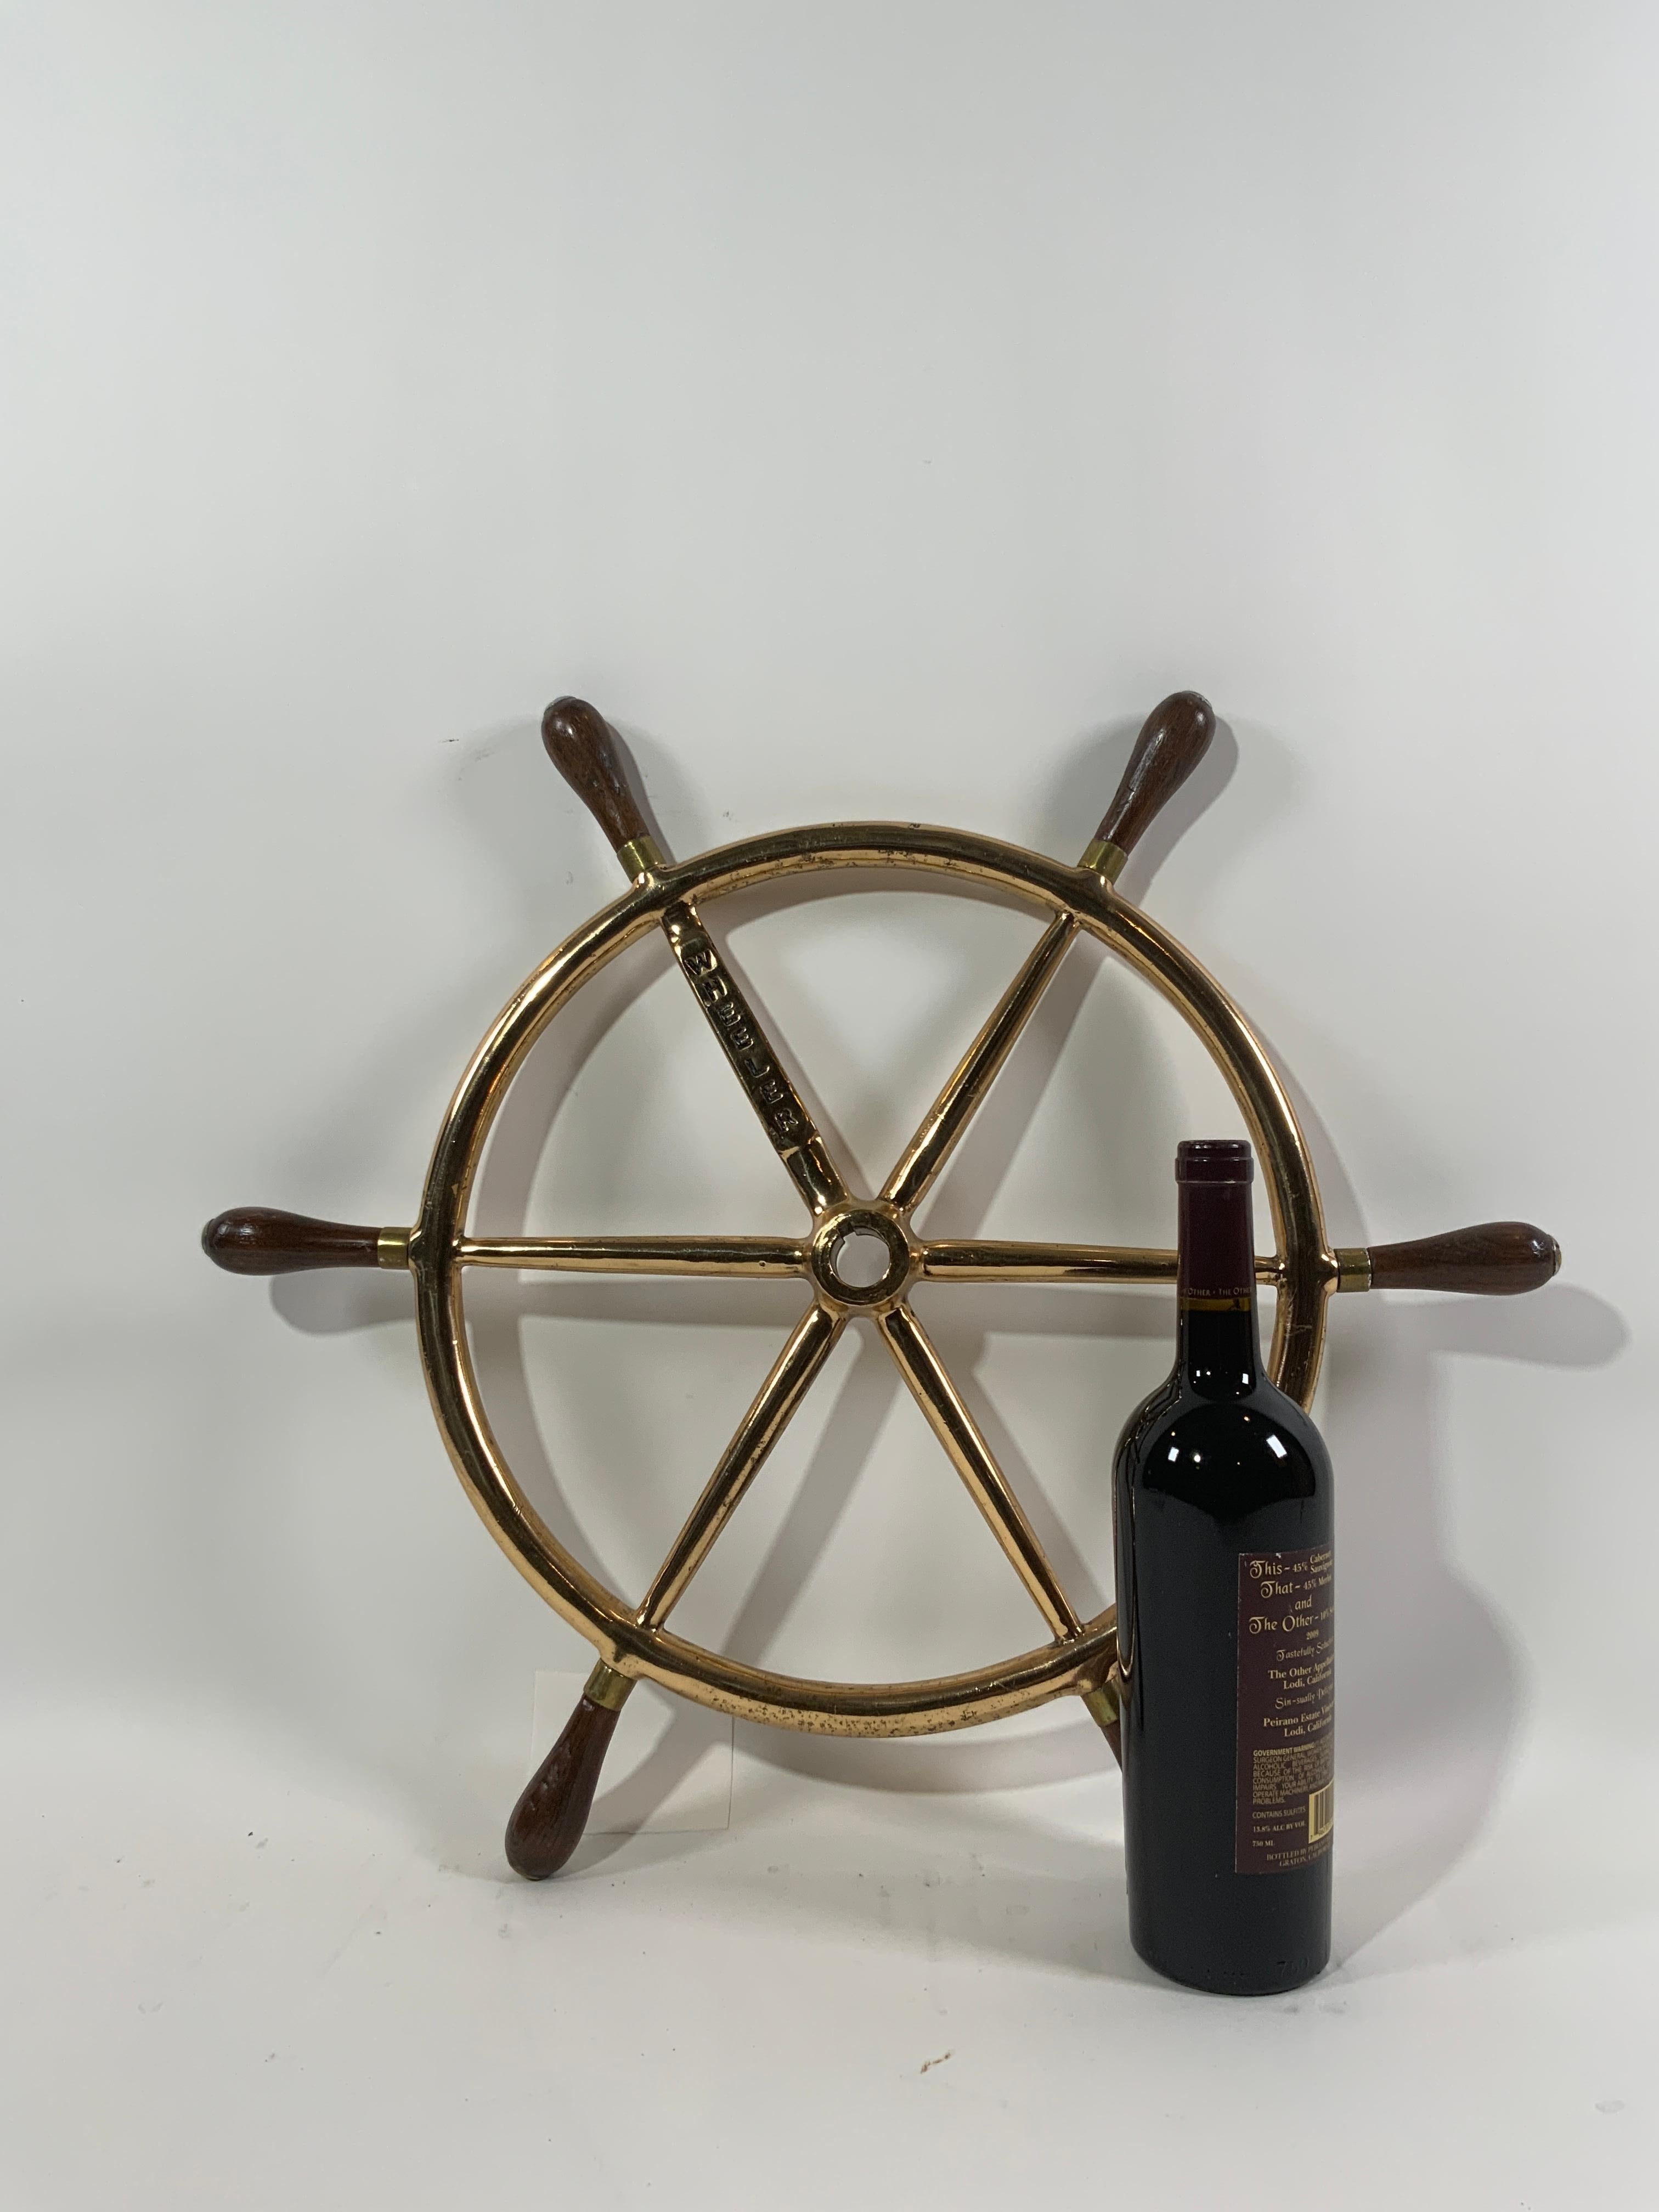 Solid brass ships wheel with the name wheeler cast into one of the spokes. Wheeler was a famous maker of yachts, up to seventy five feet, cabin cruisers, etc.

Hemingway wrote his famous novel 